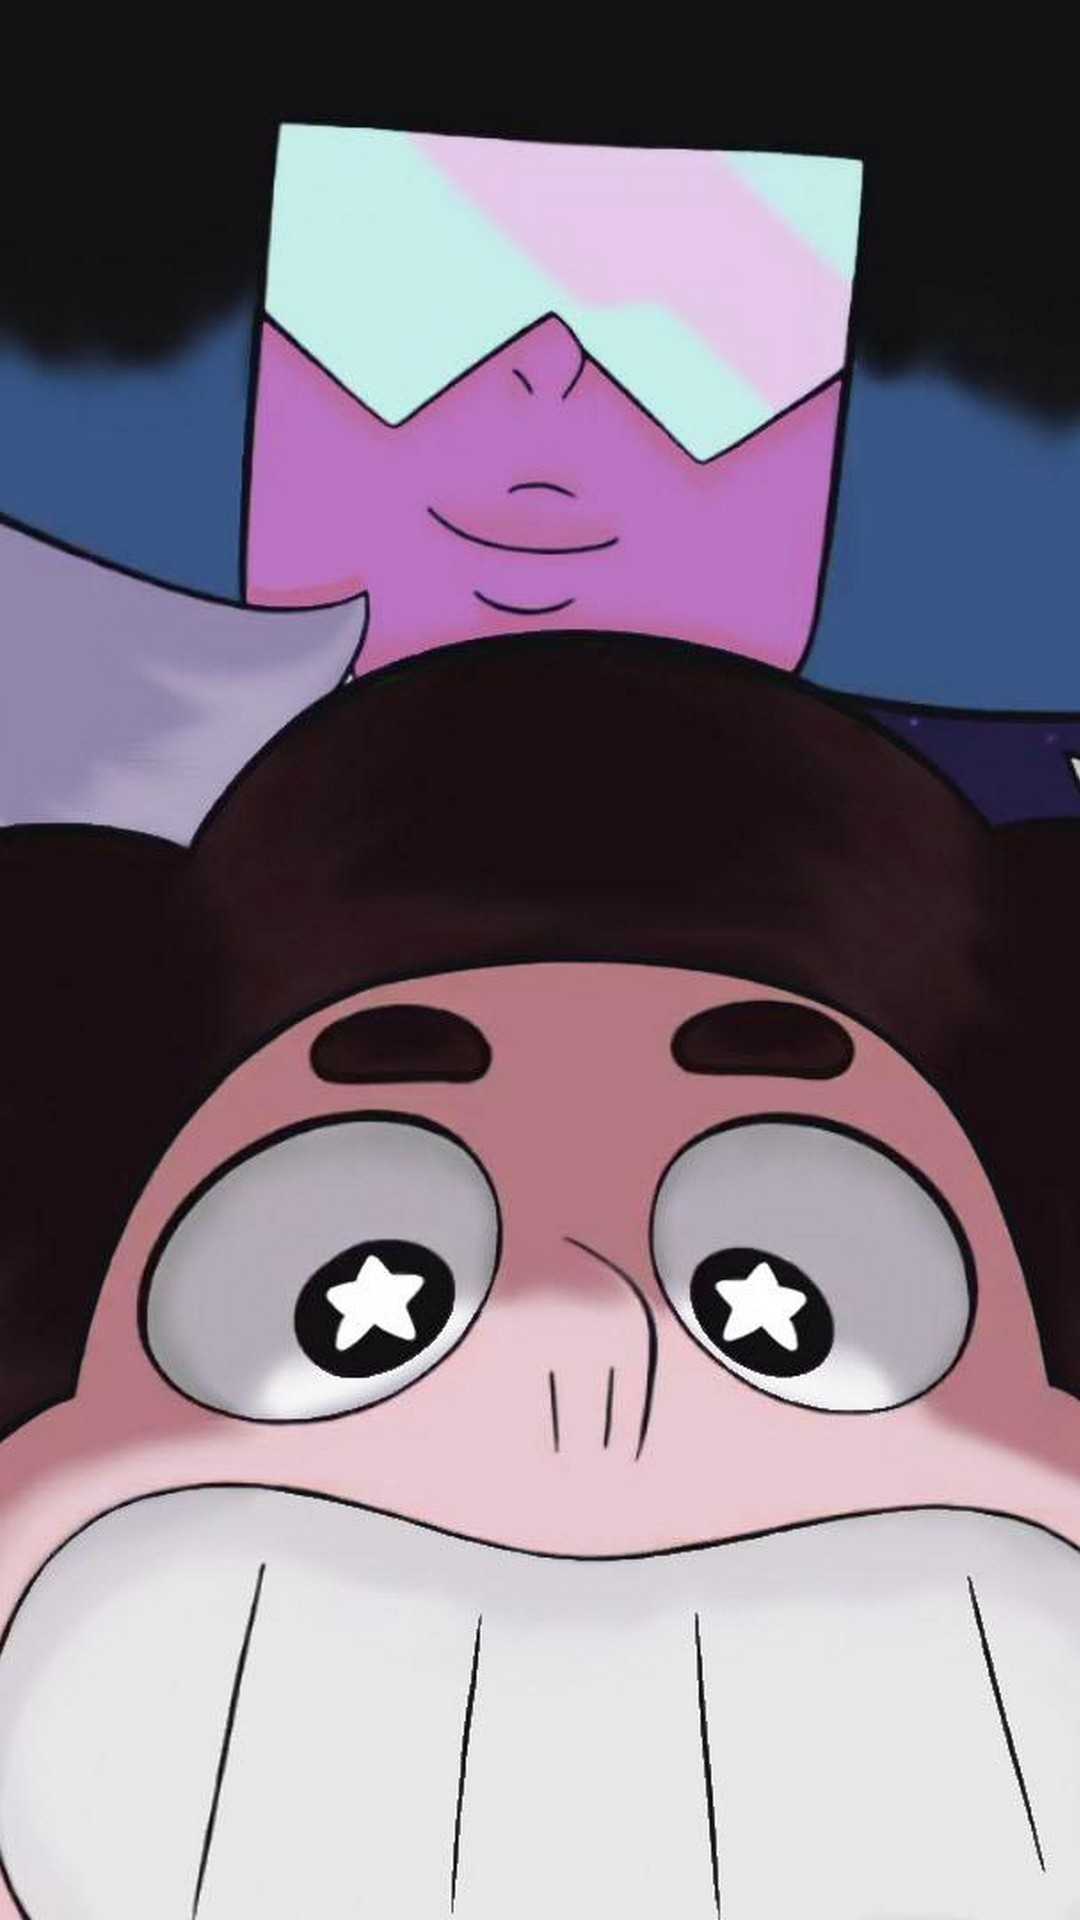 Steven Universe iPhone Wallpaper with high-resolution 1080x1920 pixel. You can use this wallpaper for your iPhone 5, 6, 7, 8, X, XS, XR backgrounds, Mobile Screensaver, or iPad Lock Screen - Steven Universe